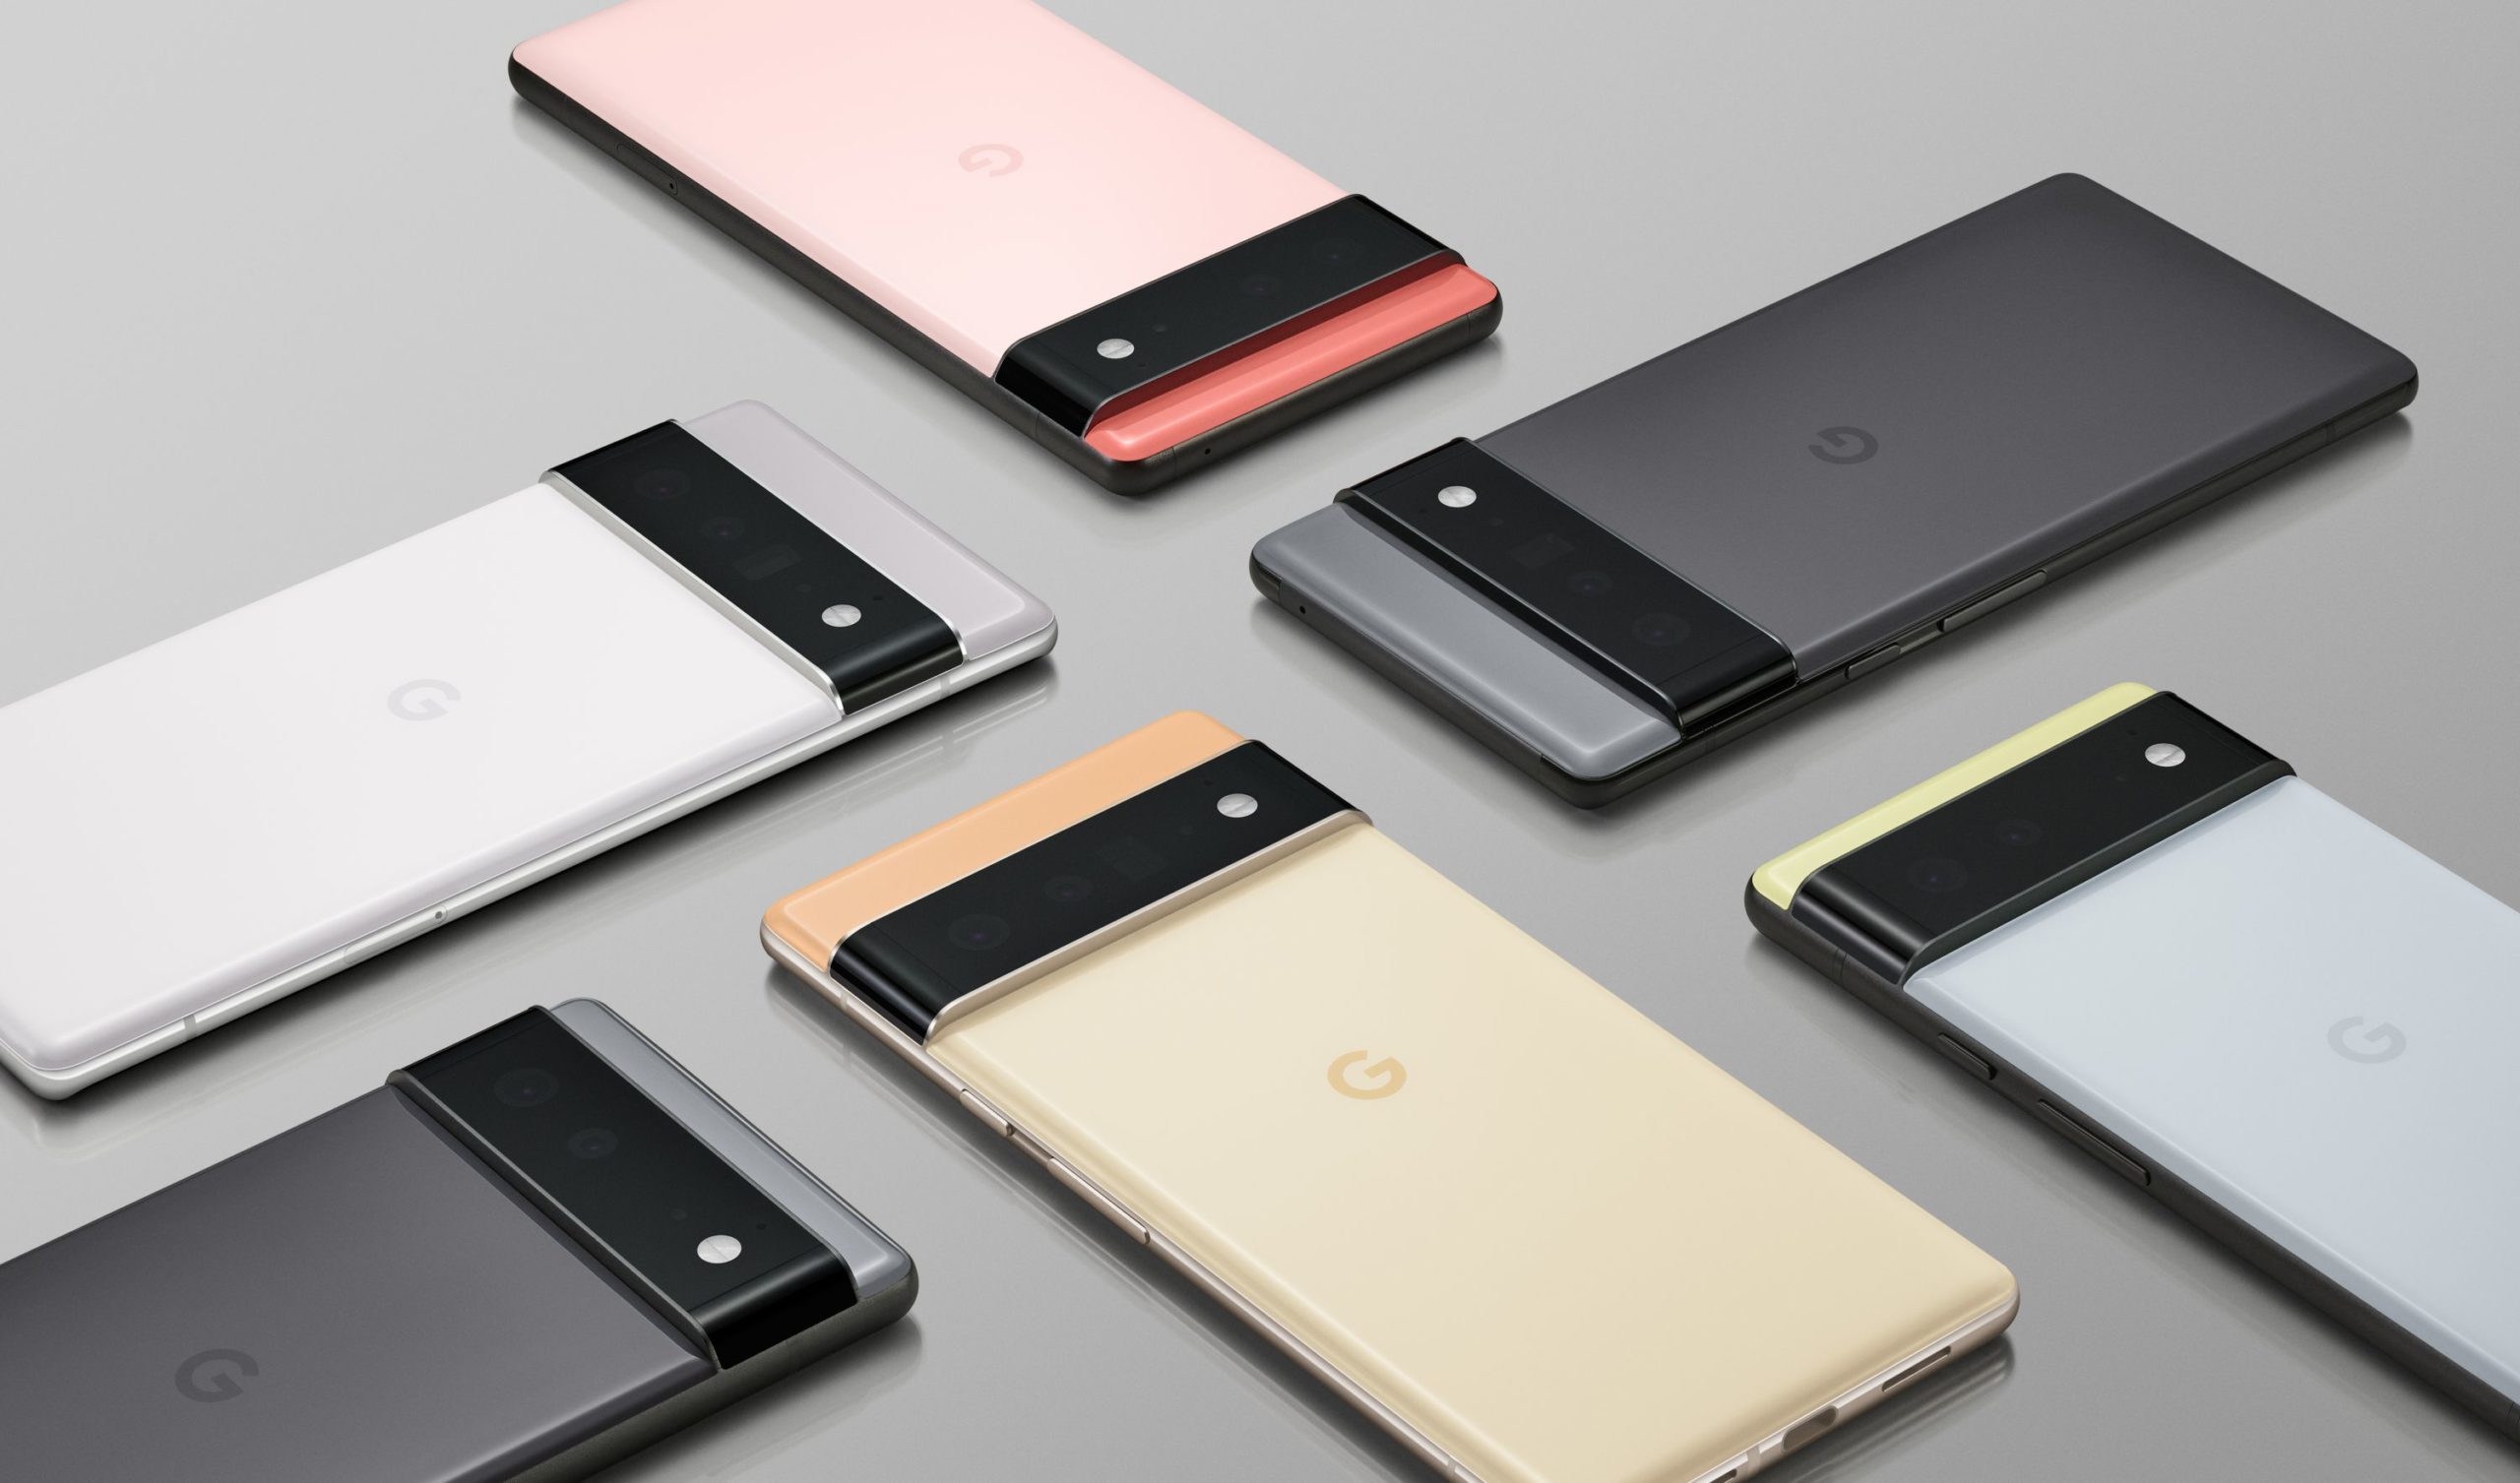 Google launches Pixel 6 and Pixel 6 Pro smartphones - Synergy Mobile